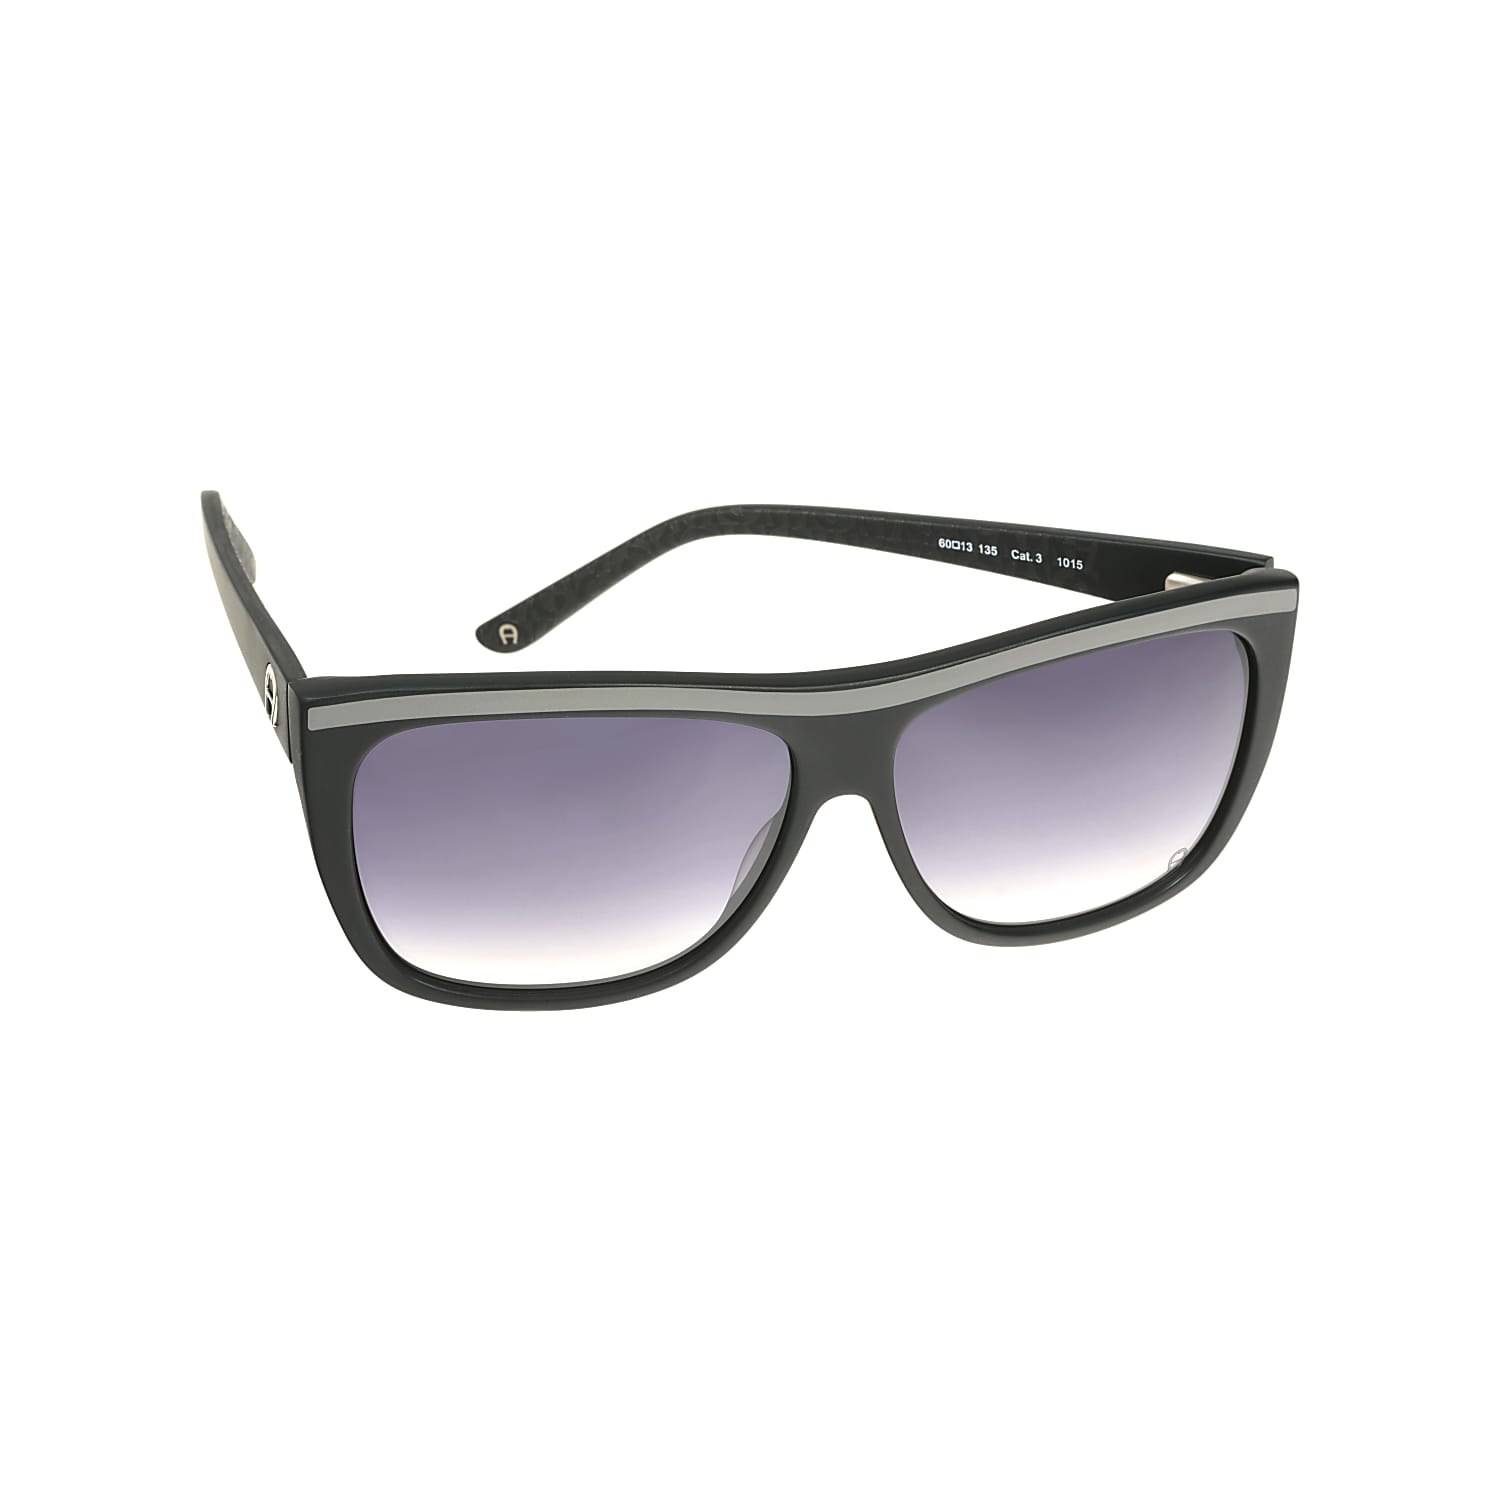 Unisex sunglass-style in a sporty look